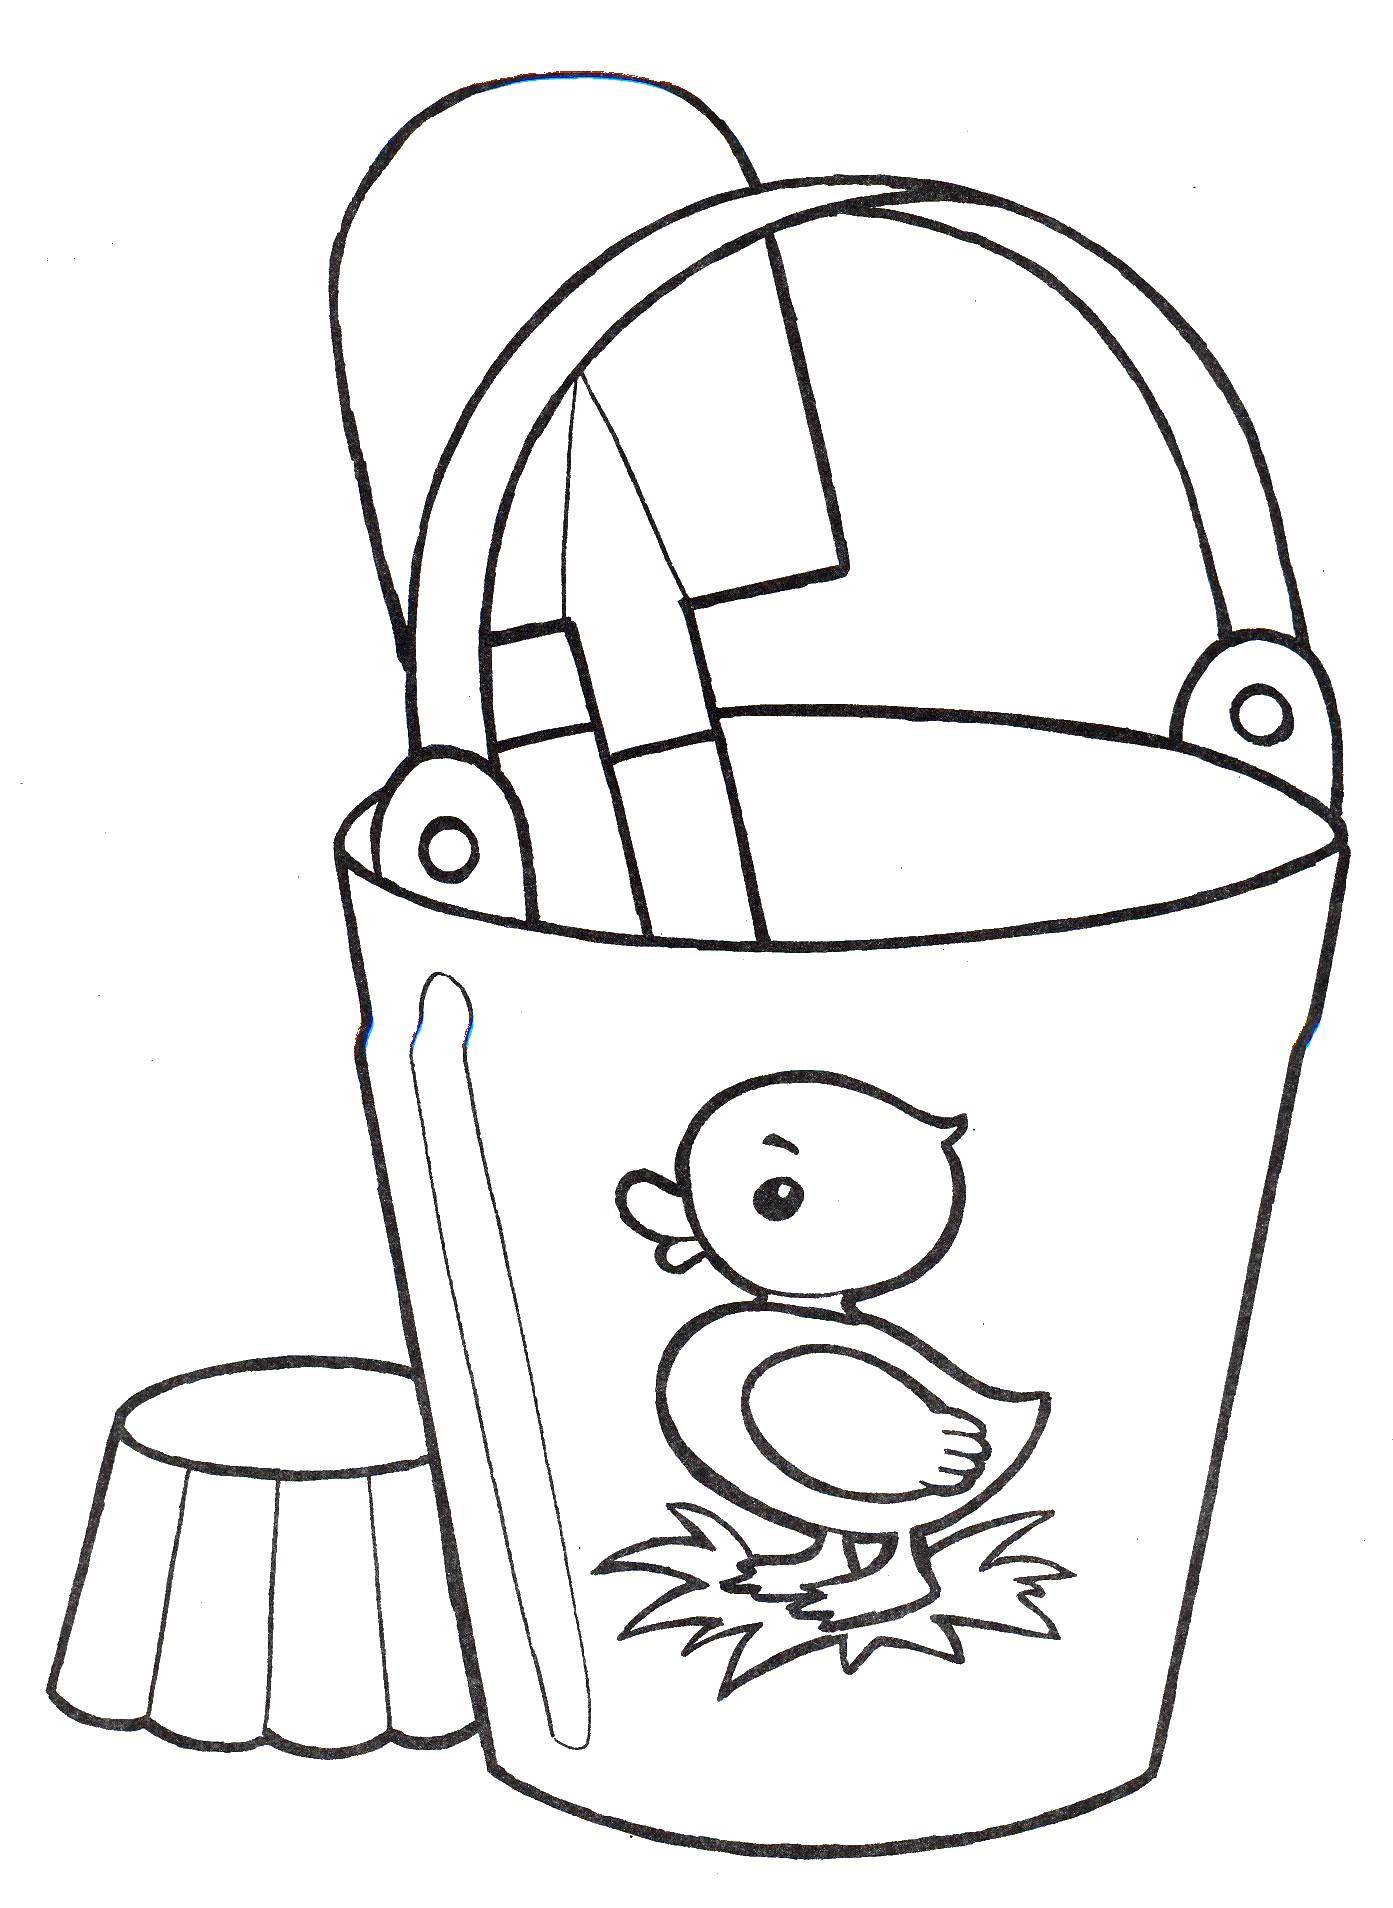 Coloring Bucket with shovel. Category toys. Tags:  bucket, shovel.